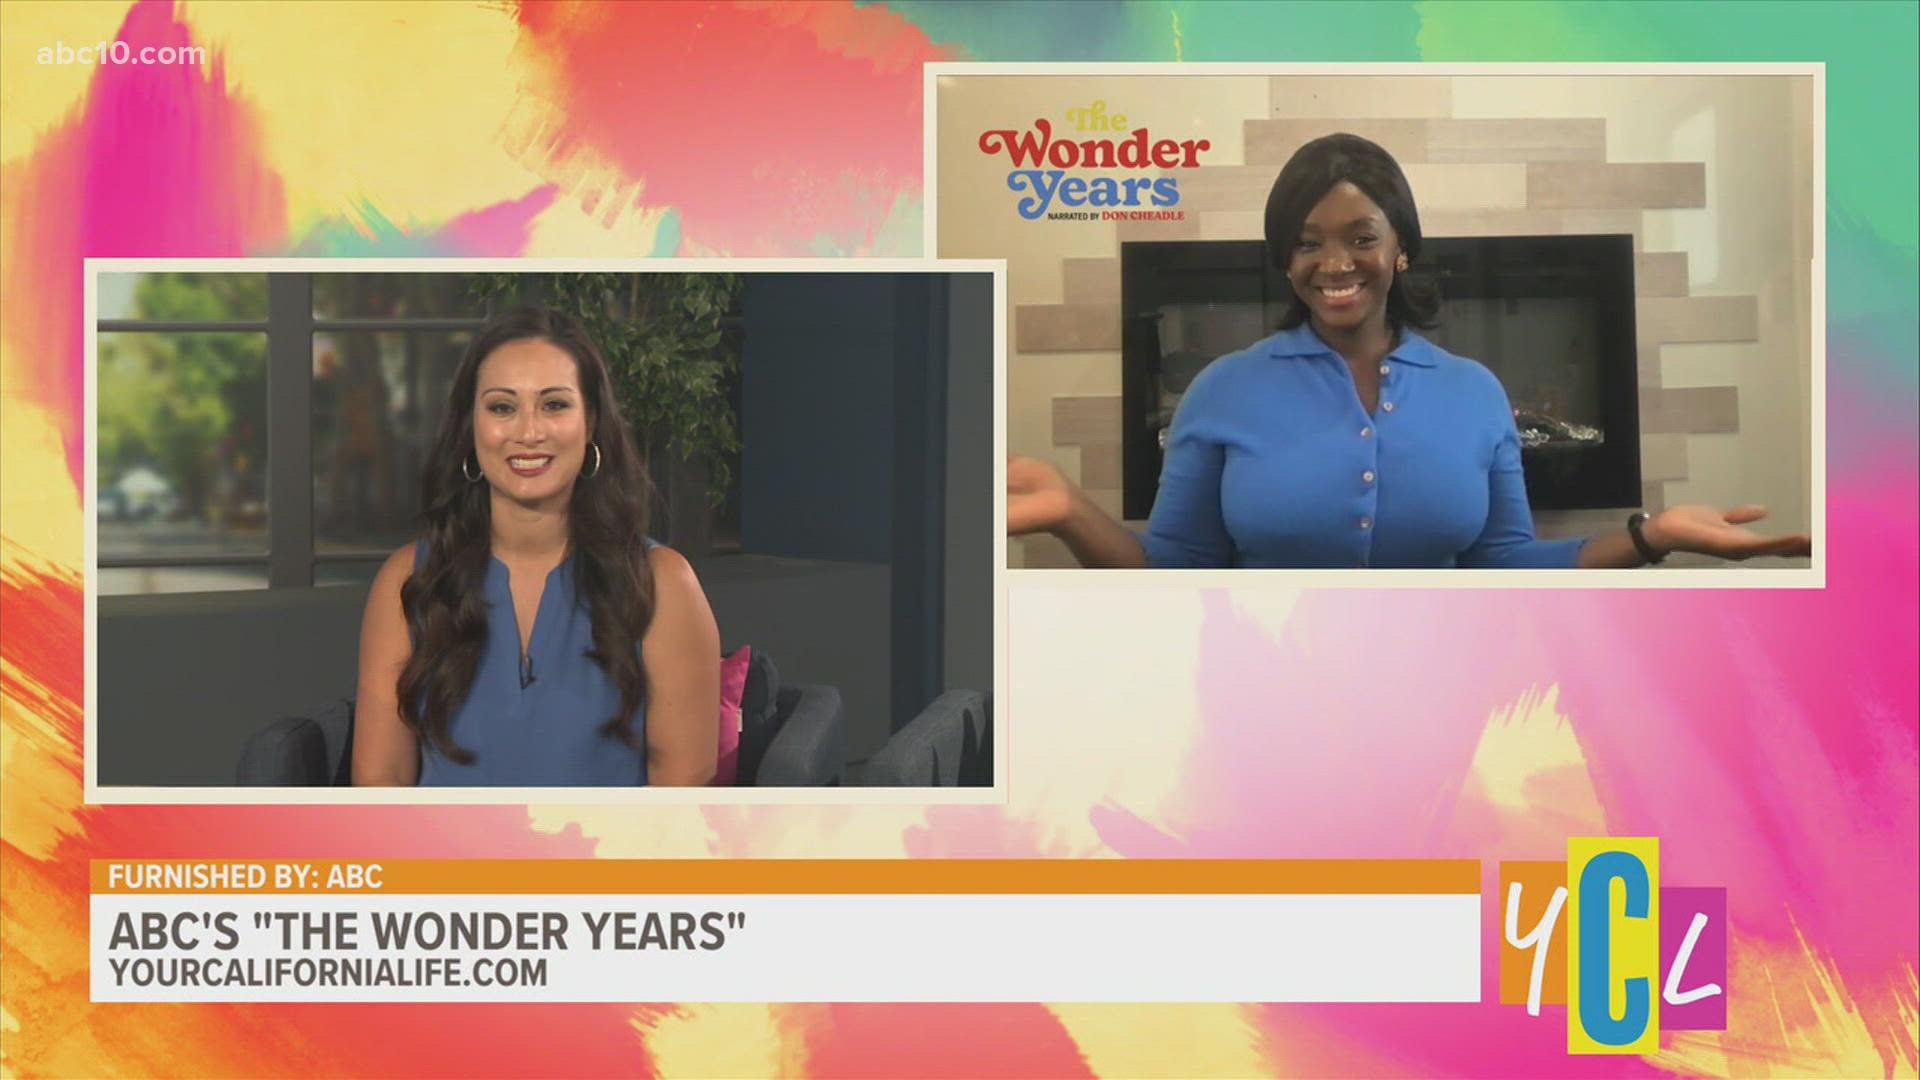 We talk live with Saycon Sengbloch who's starring in ABC's "The Wonder Years," who tells us what audiences can expect from this coming of age comedy.